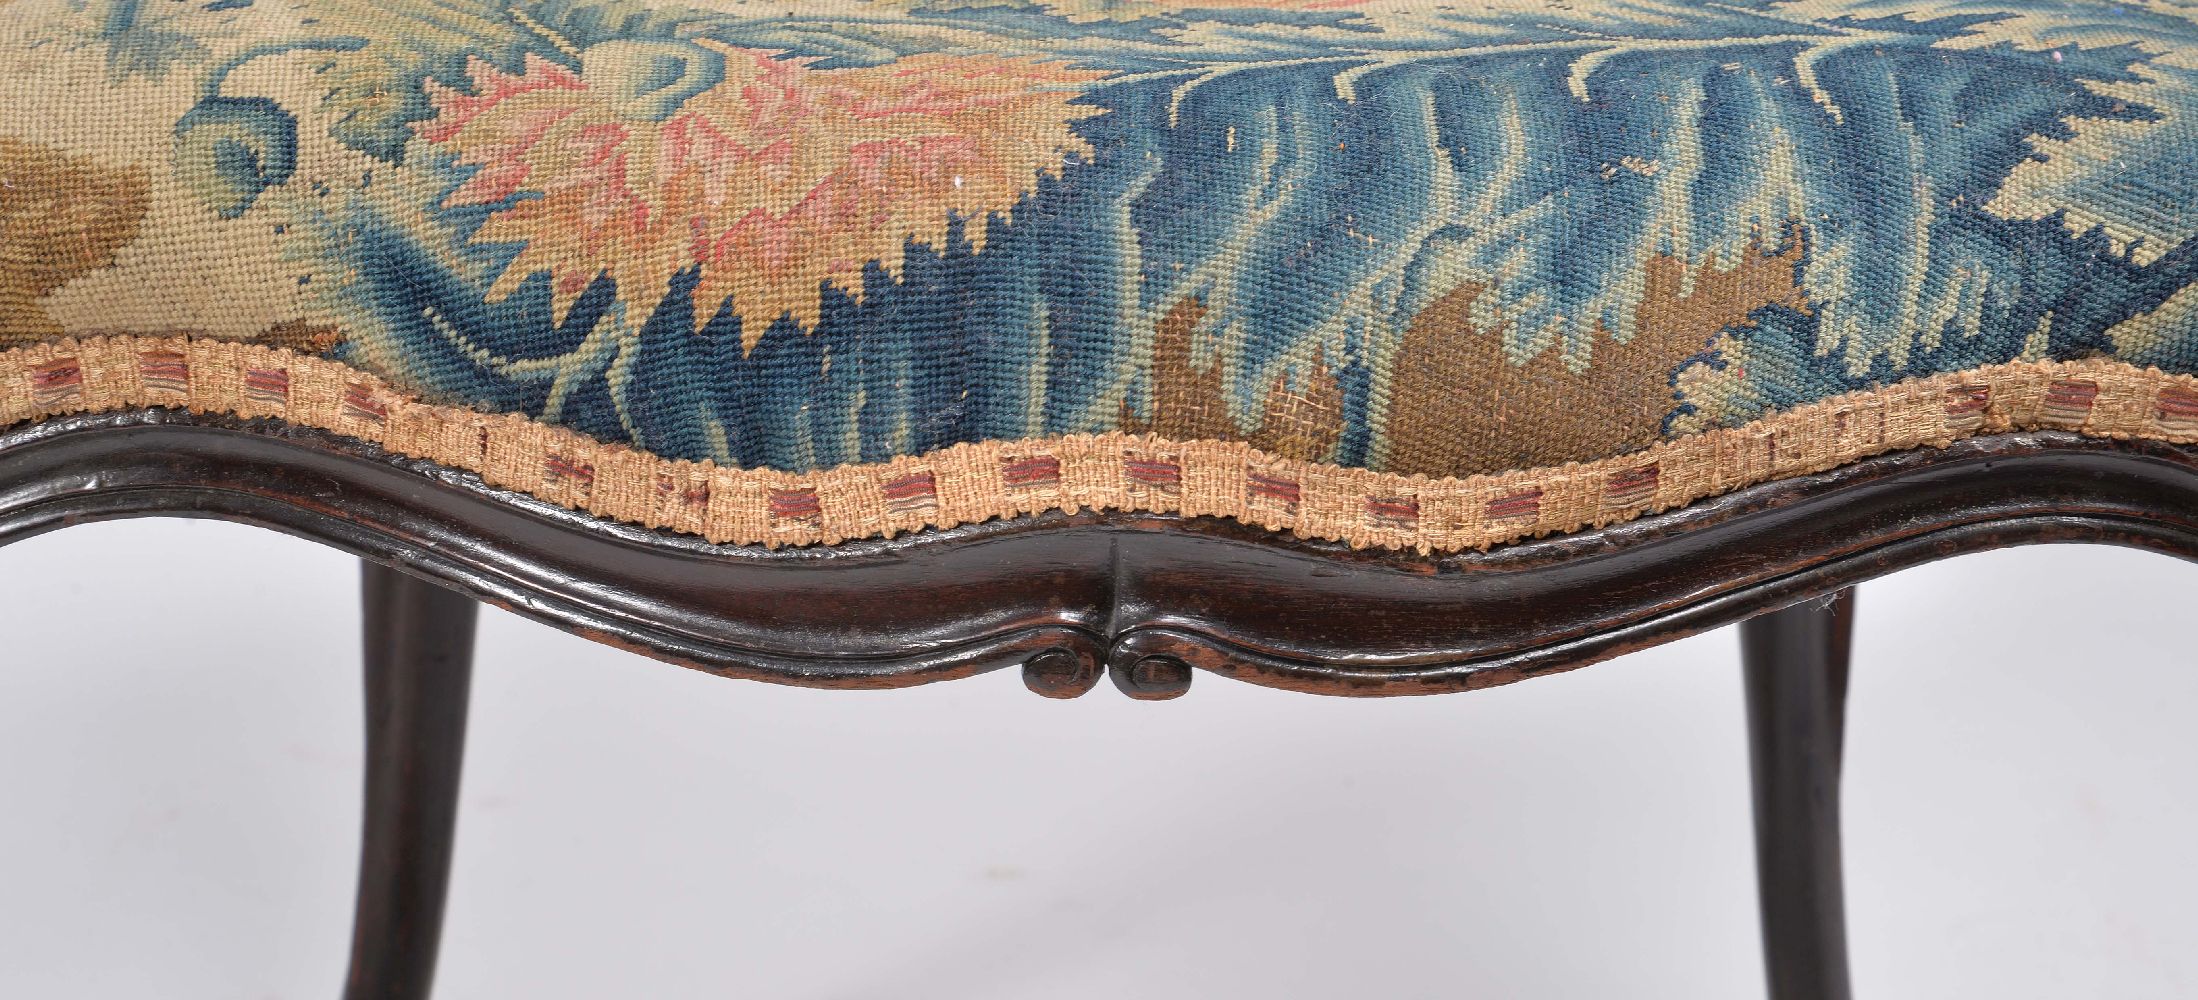 A pair of George III mahogany and needlework upholstered side chairs - Image 7 of 7